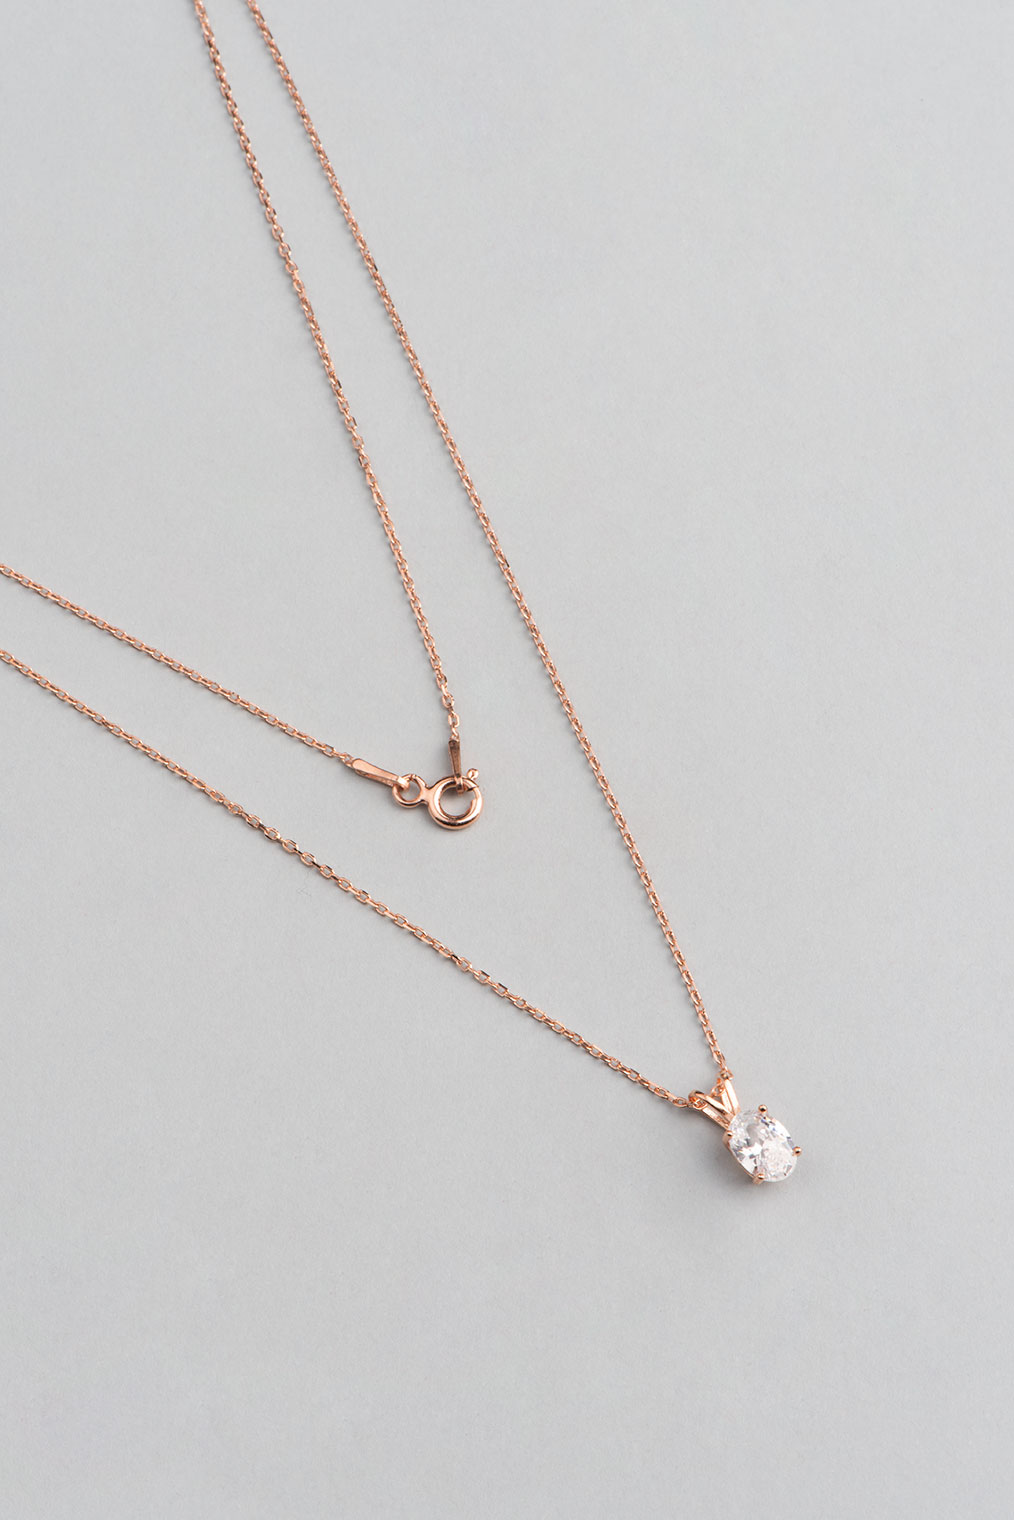 Oval Cut 5X7mm 18K Rose Gold Plated Silver Necklace